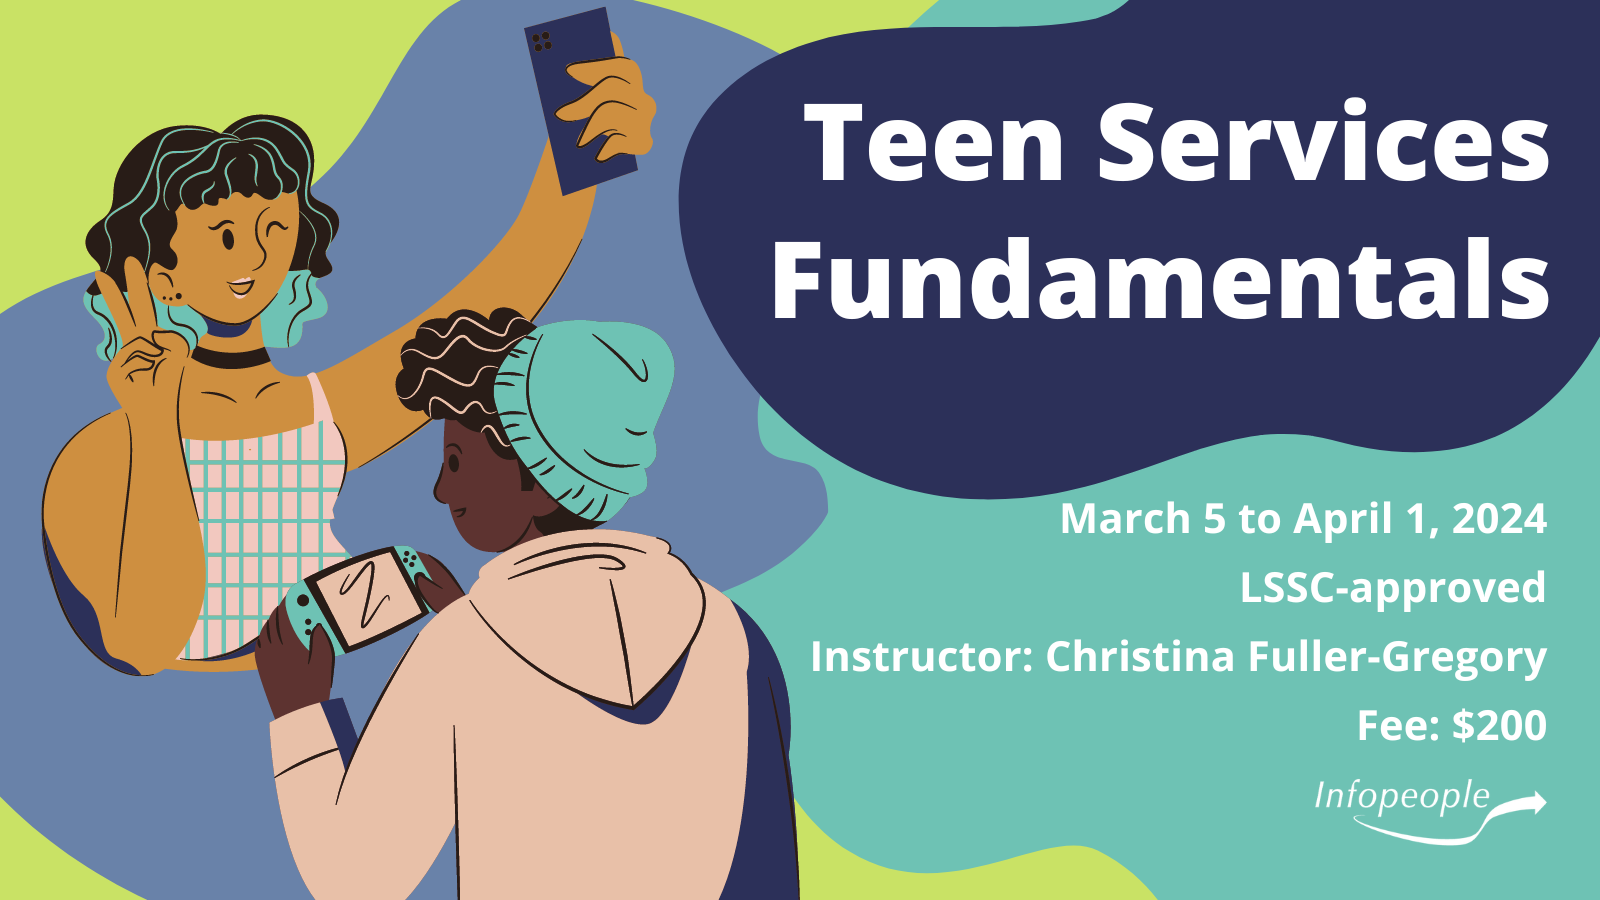 Teen Services Fundamentals - an Infopeople course. March 5 - April 1, 2024. LSSC-approved. Instructor: Christina Fuller-Gregory. Fee: $200. Two teenagers, one taking a selfie and the other playing a handheld video game.